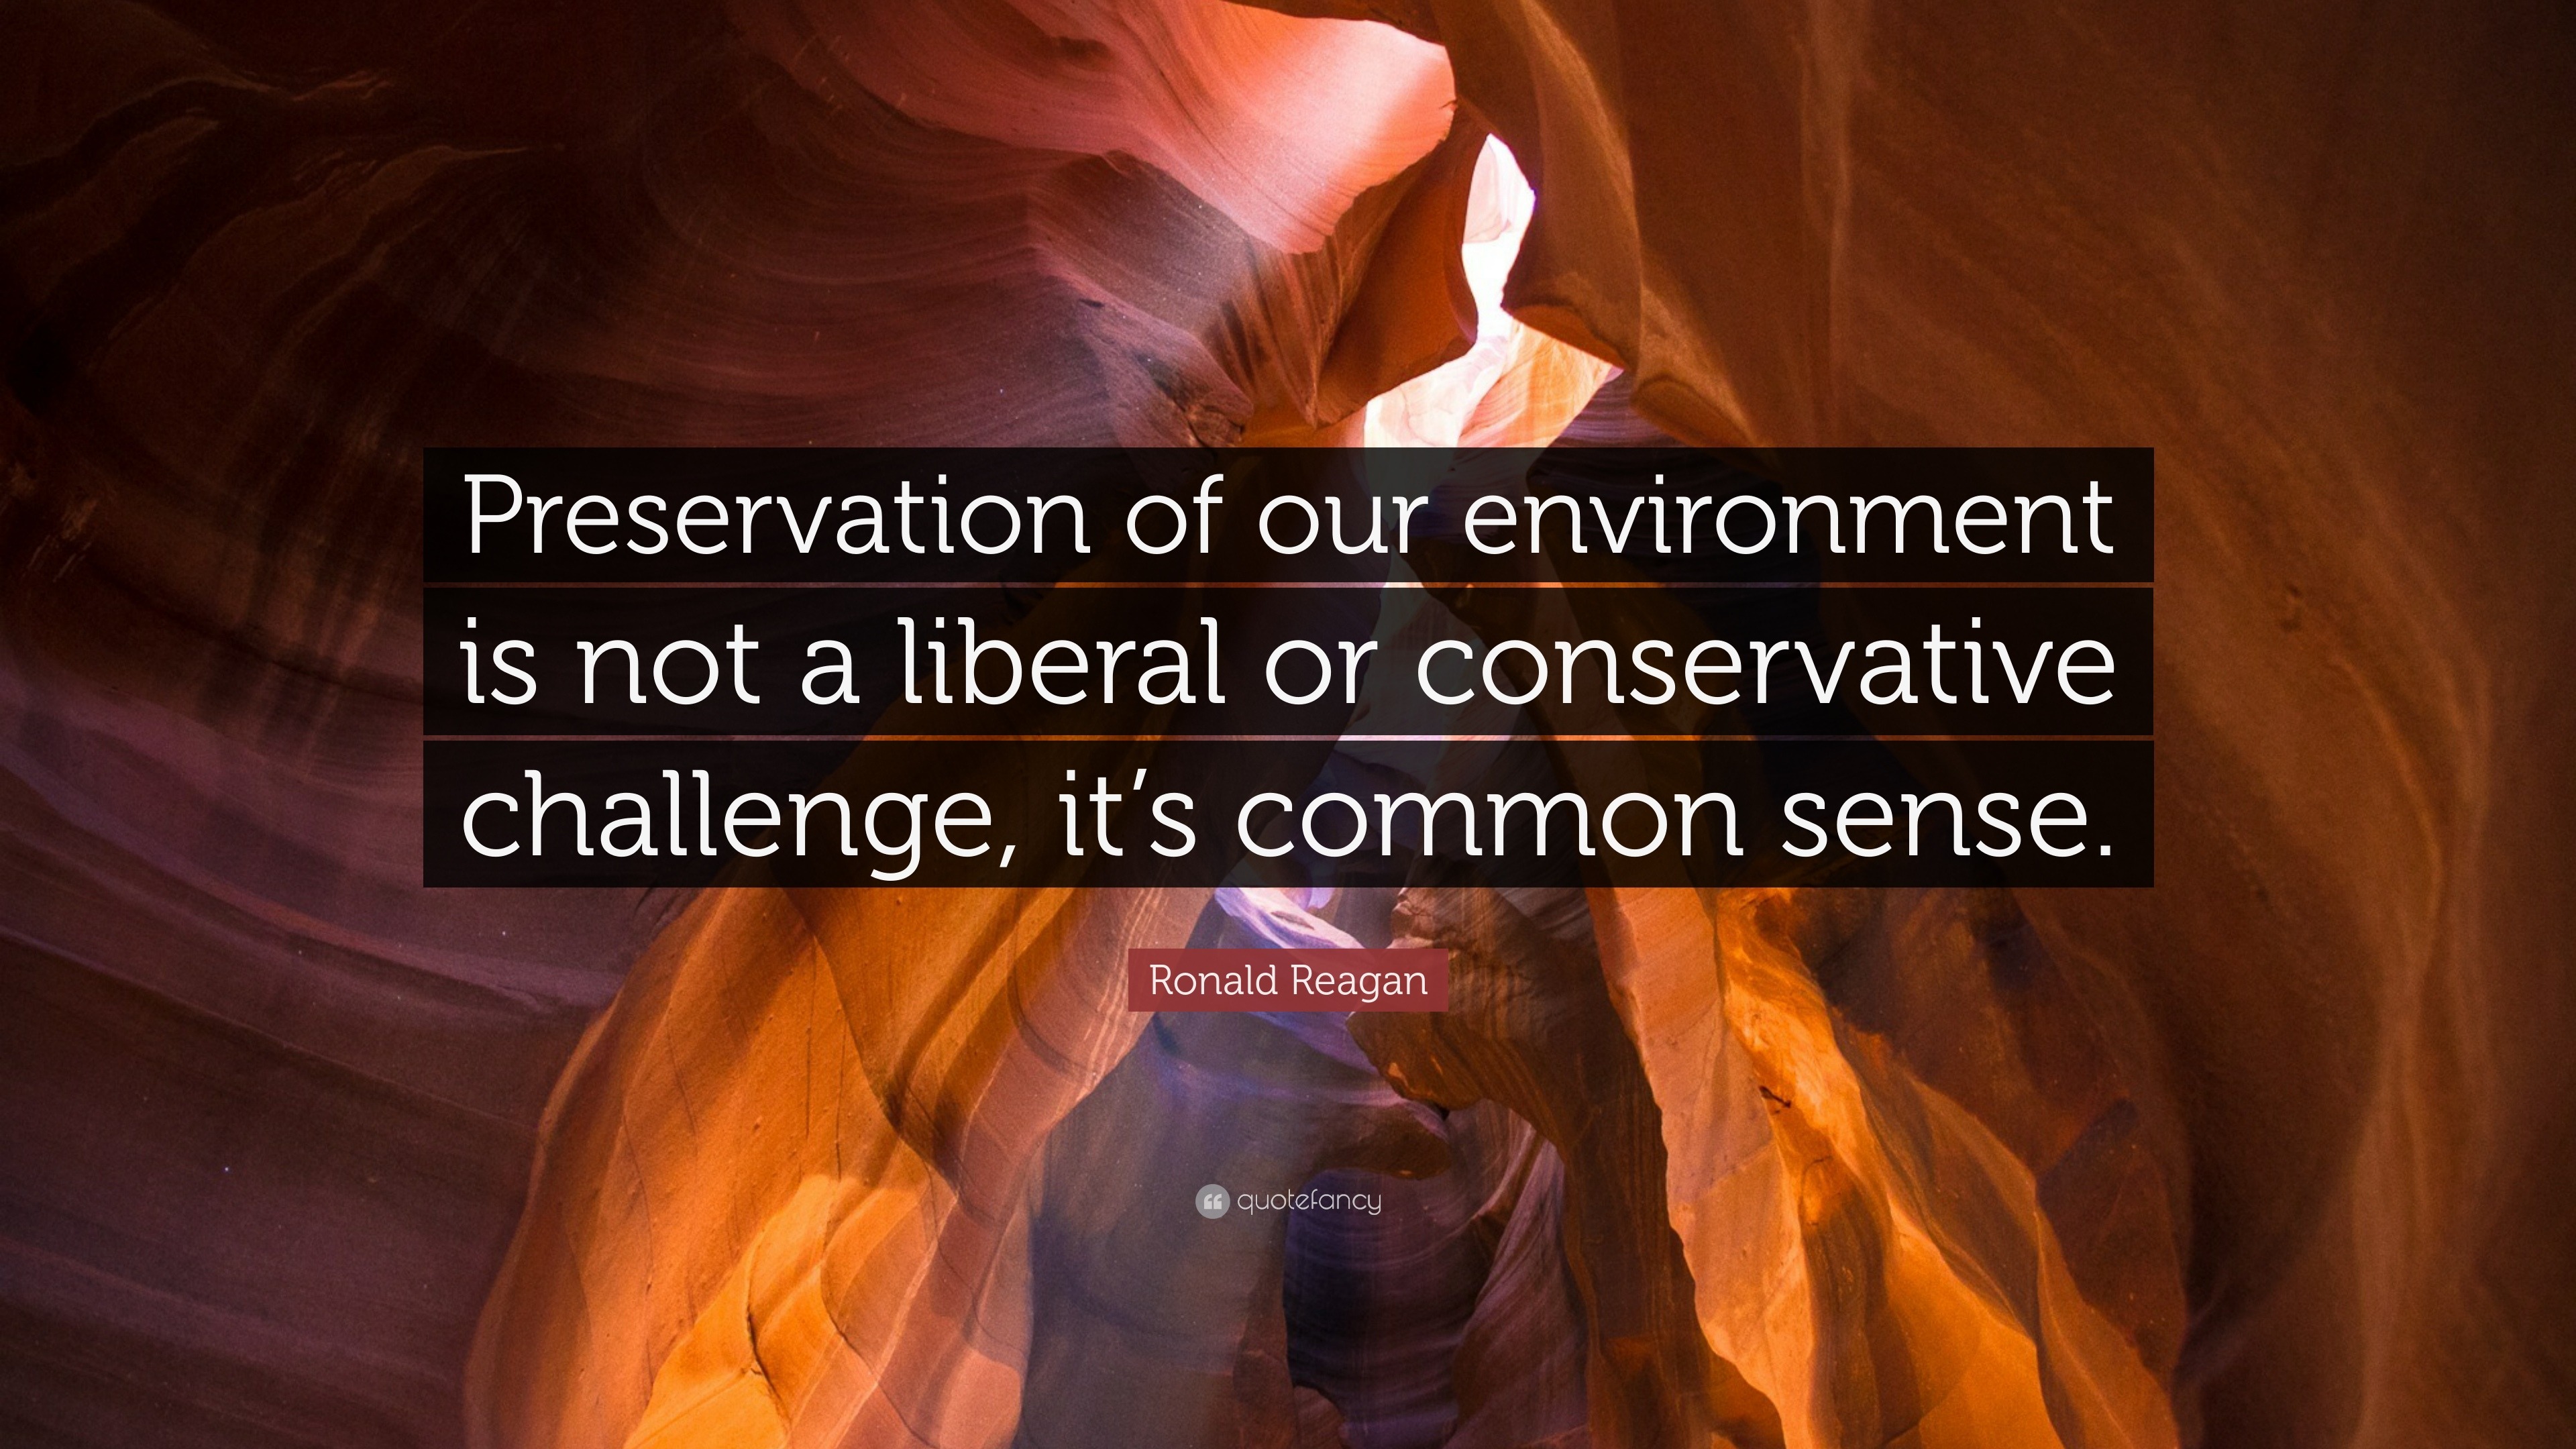 69587 Ronald Reagan Quote Preservation of our environment is not a